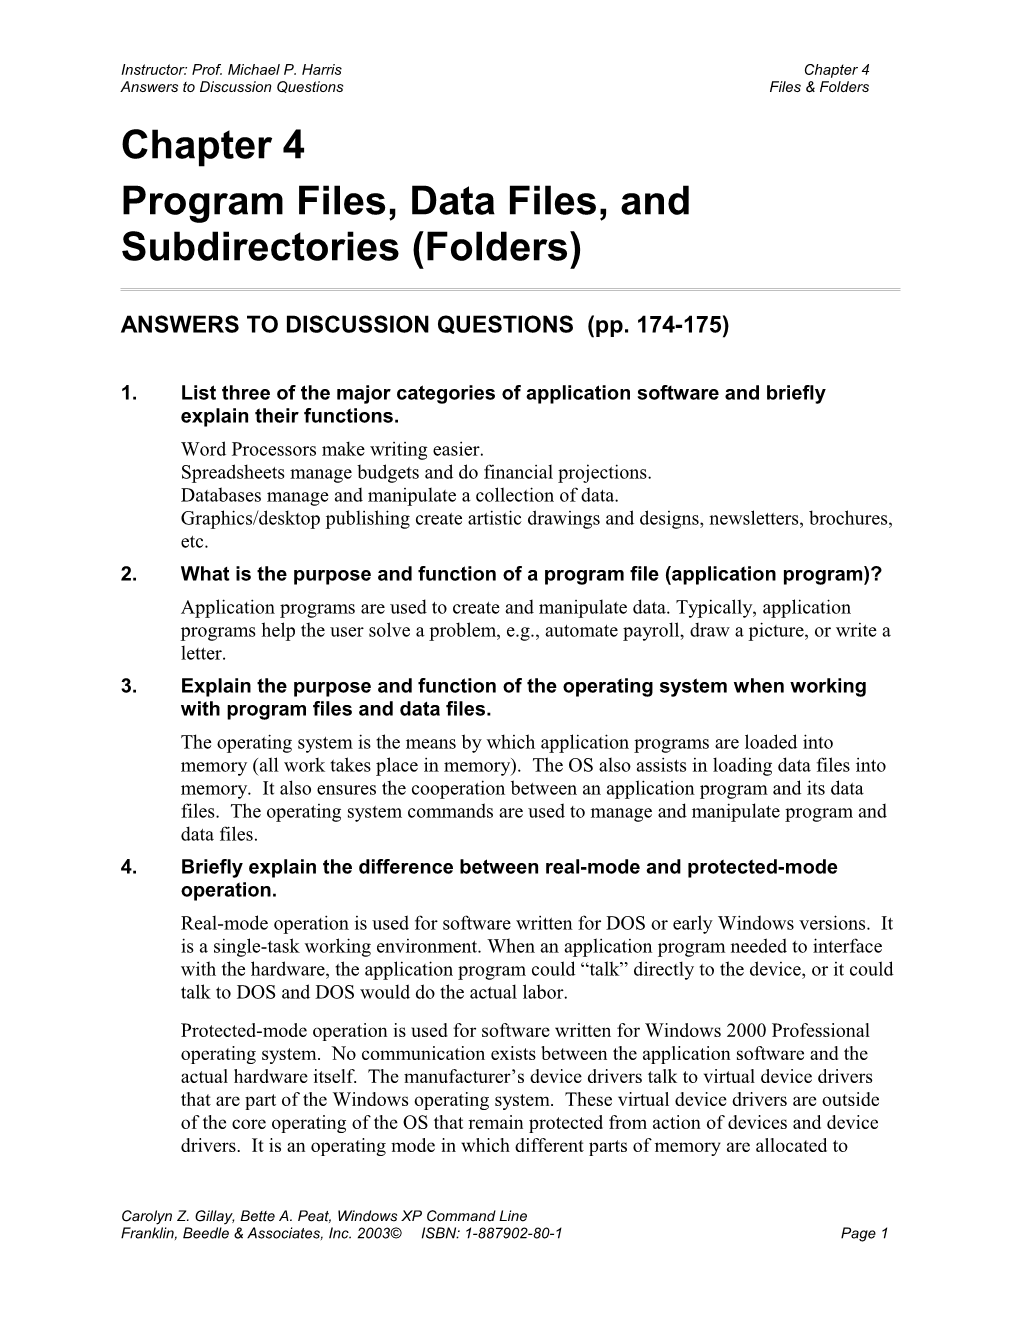 Ch 4 - Program Files, Data Files, And Subdirectories